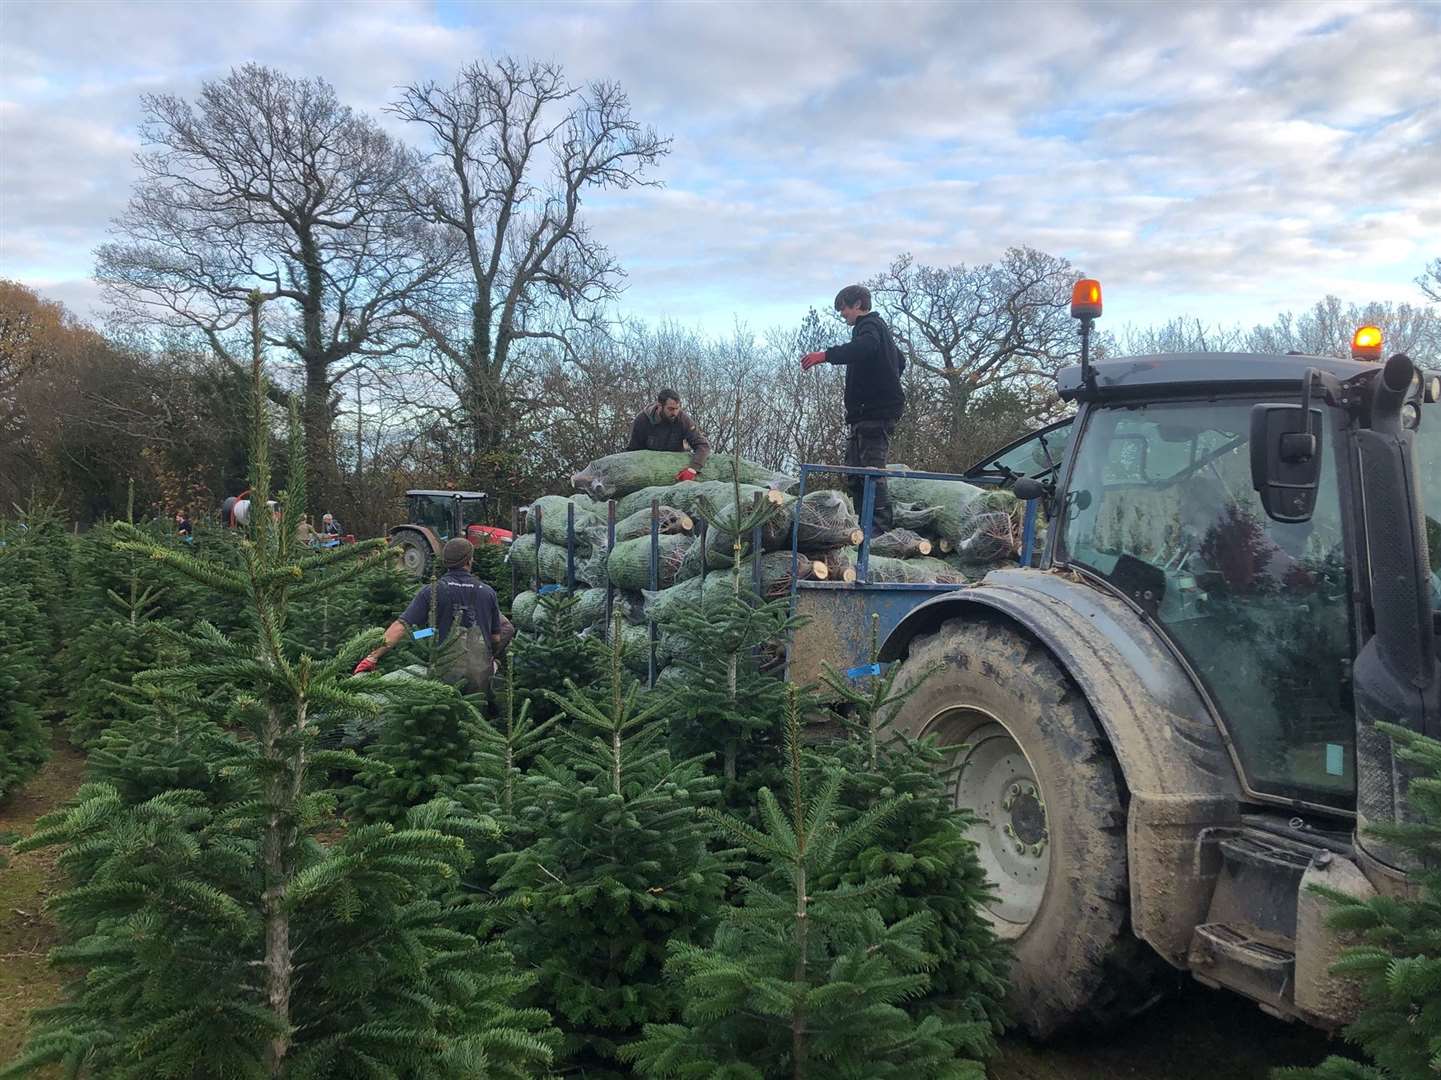 The Christmas tree harvest has started at Hole Park - loading trees from the plantations